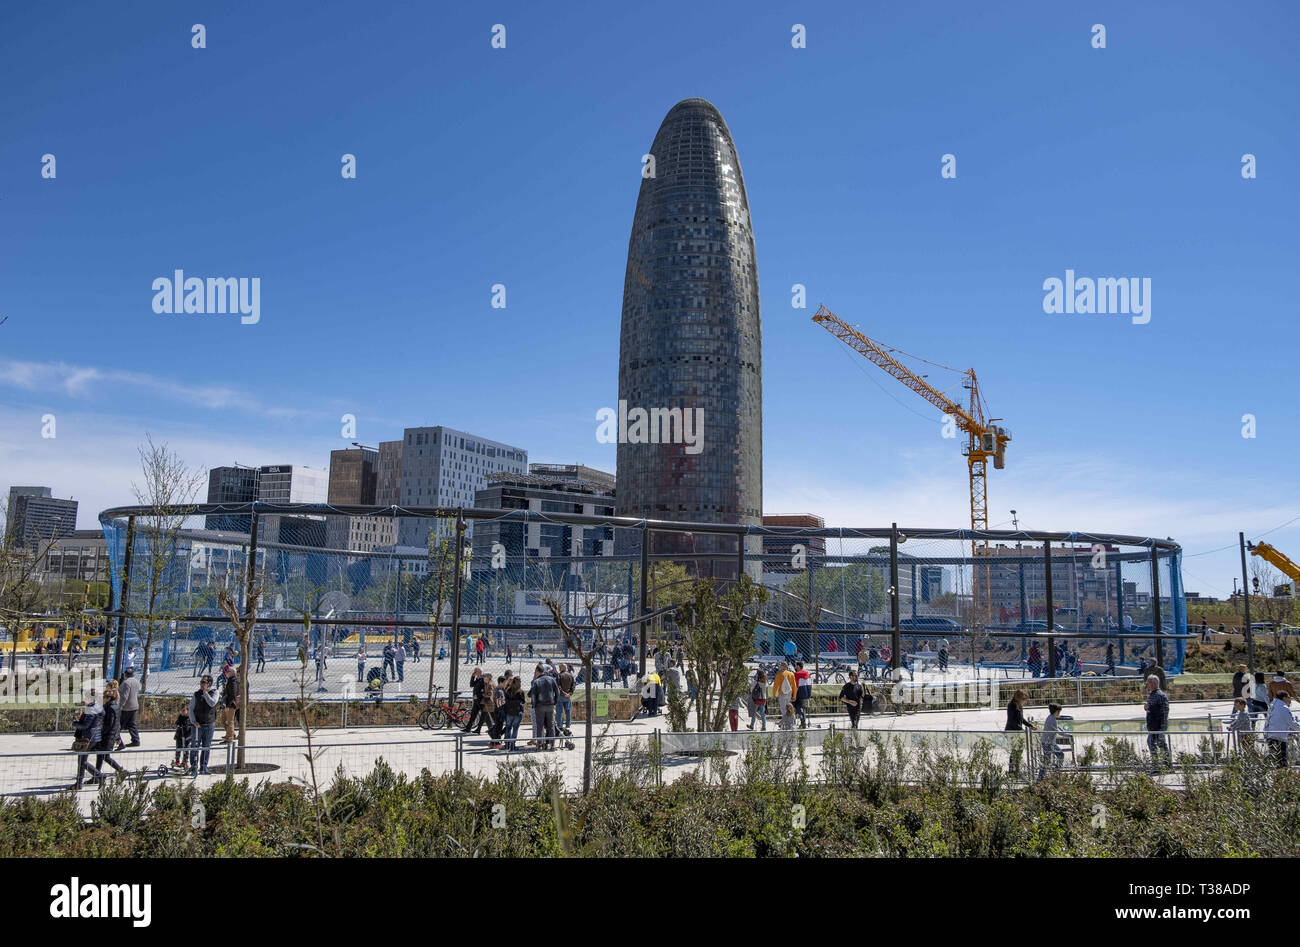 Barcelona, Catalonia, Spain. 7th Apr, 2019. A ball game area seen inside the new Les GlÃ²ries park.From April 6 the citizens of Barcelona can visit and be users of a new green surface of 20,400 m2 with 400 trees. The new Les GlÃ²ries park is the final urban solution to a large concentration of vehicle traffic that will circulate underground in the future. This new green area also rehabilitates an urban area that already has very important cultural centers. Credit: ZUMA Press, Inc./Alamy Live News Stock Photo